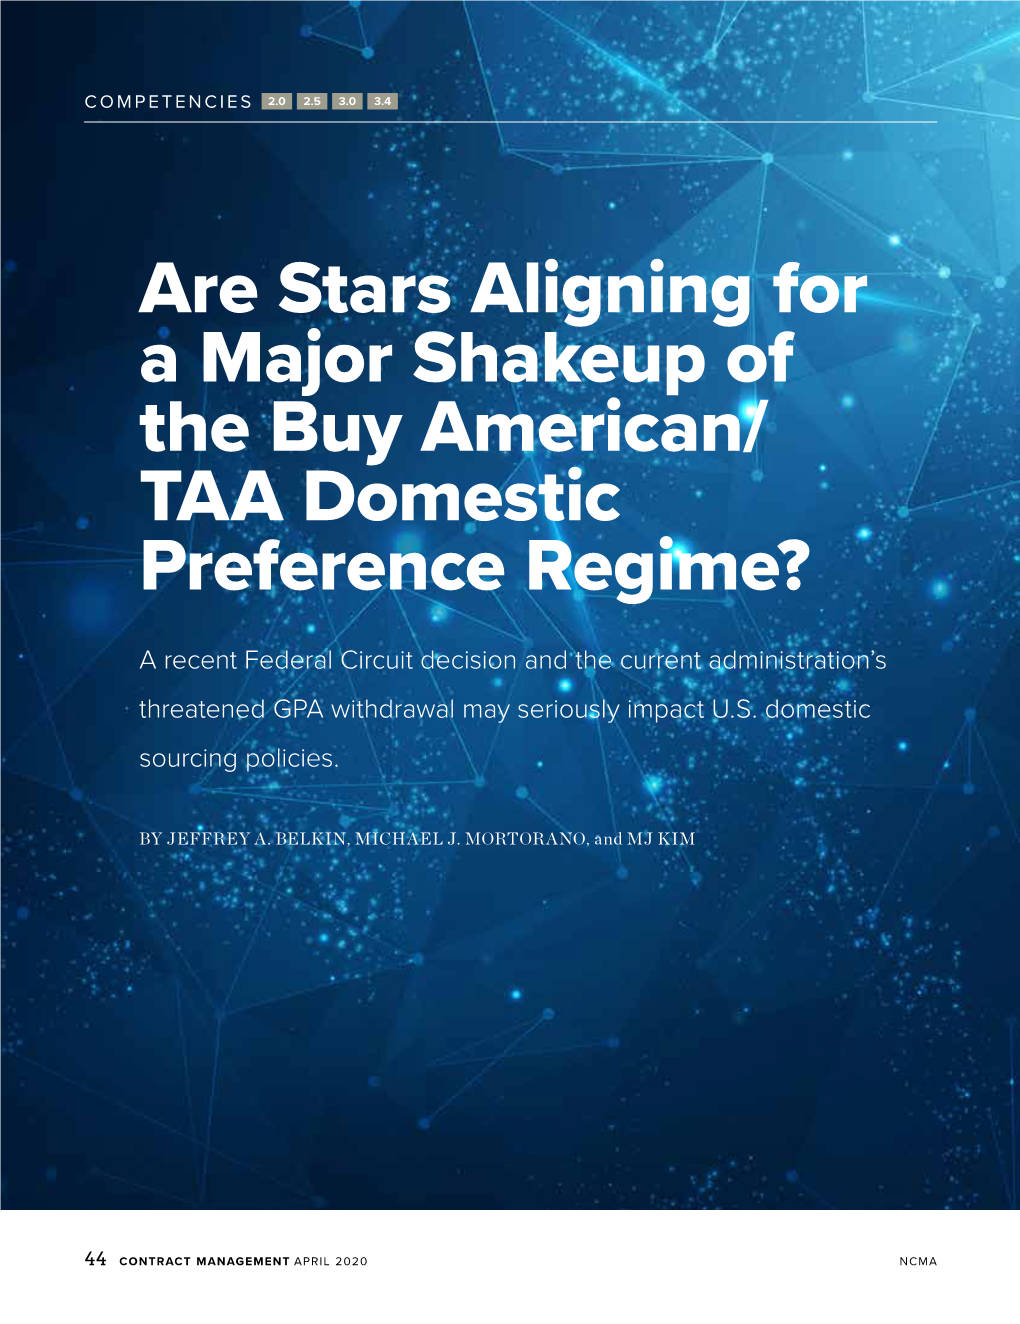 Are Stars Aligning for a Major Shakeup of the Buy American/ TAA Domestic Preference Regime?